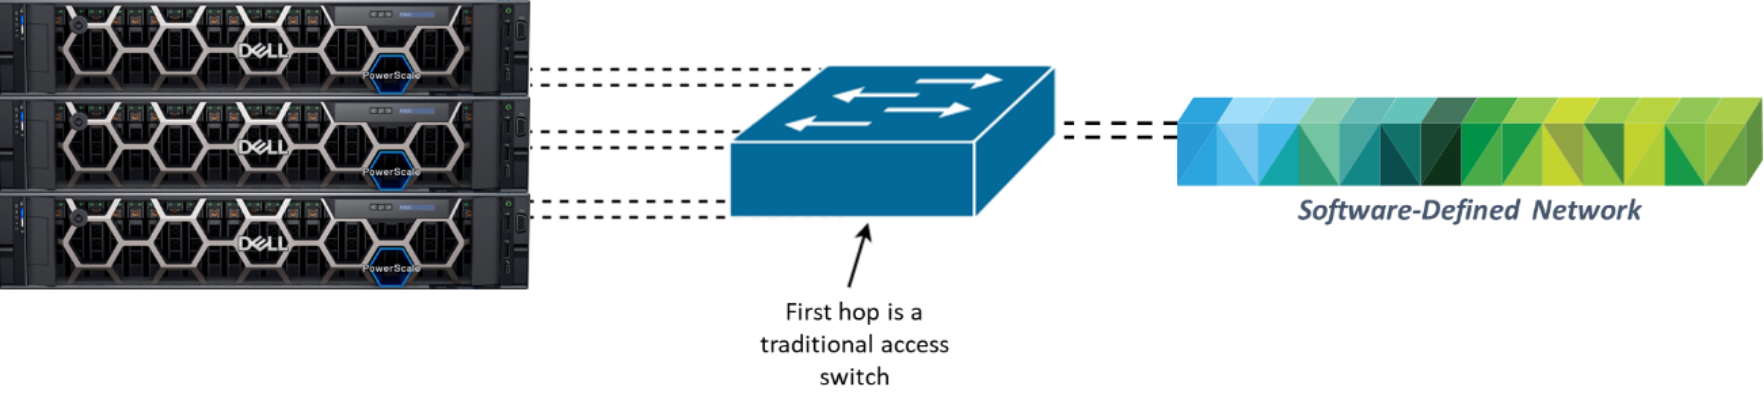 A figure illustrating the PowerScale and Software-Defined Networking.